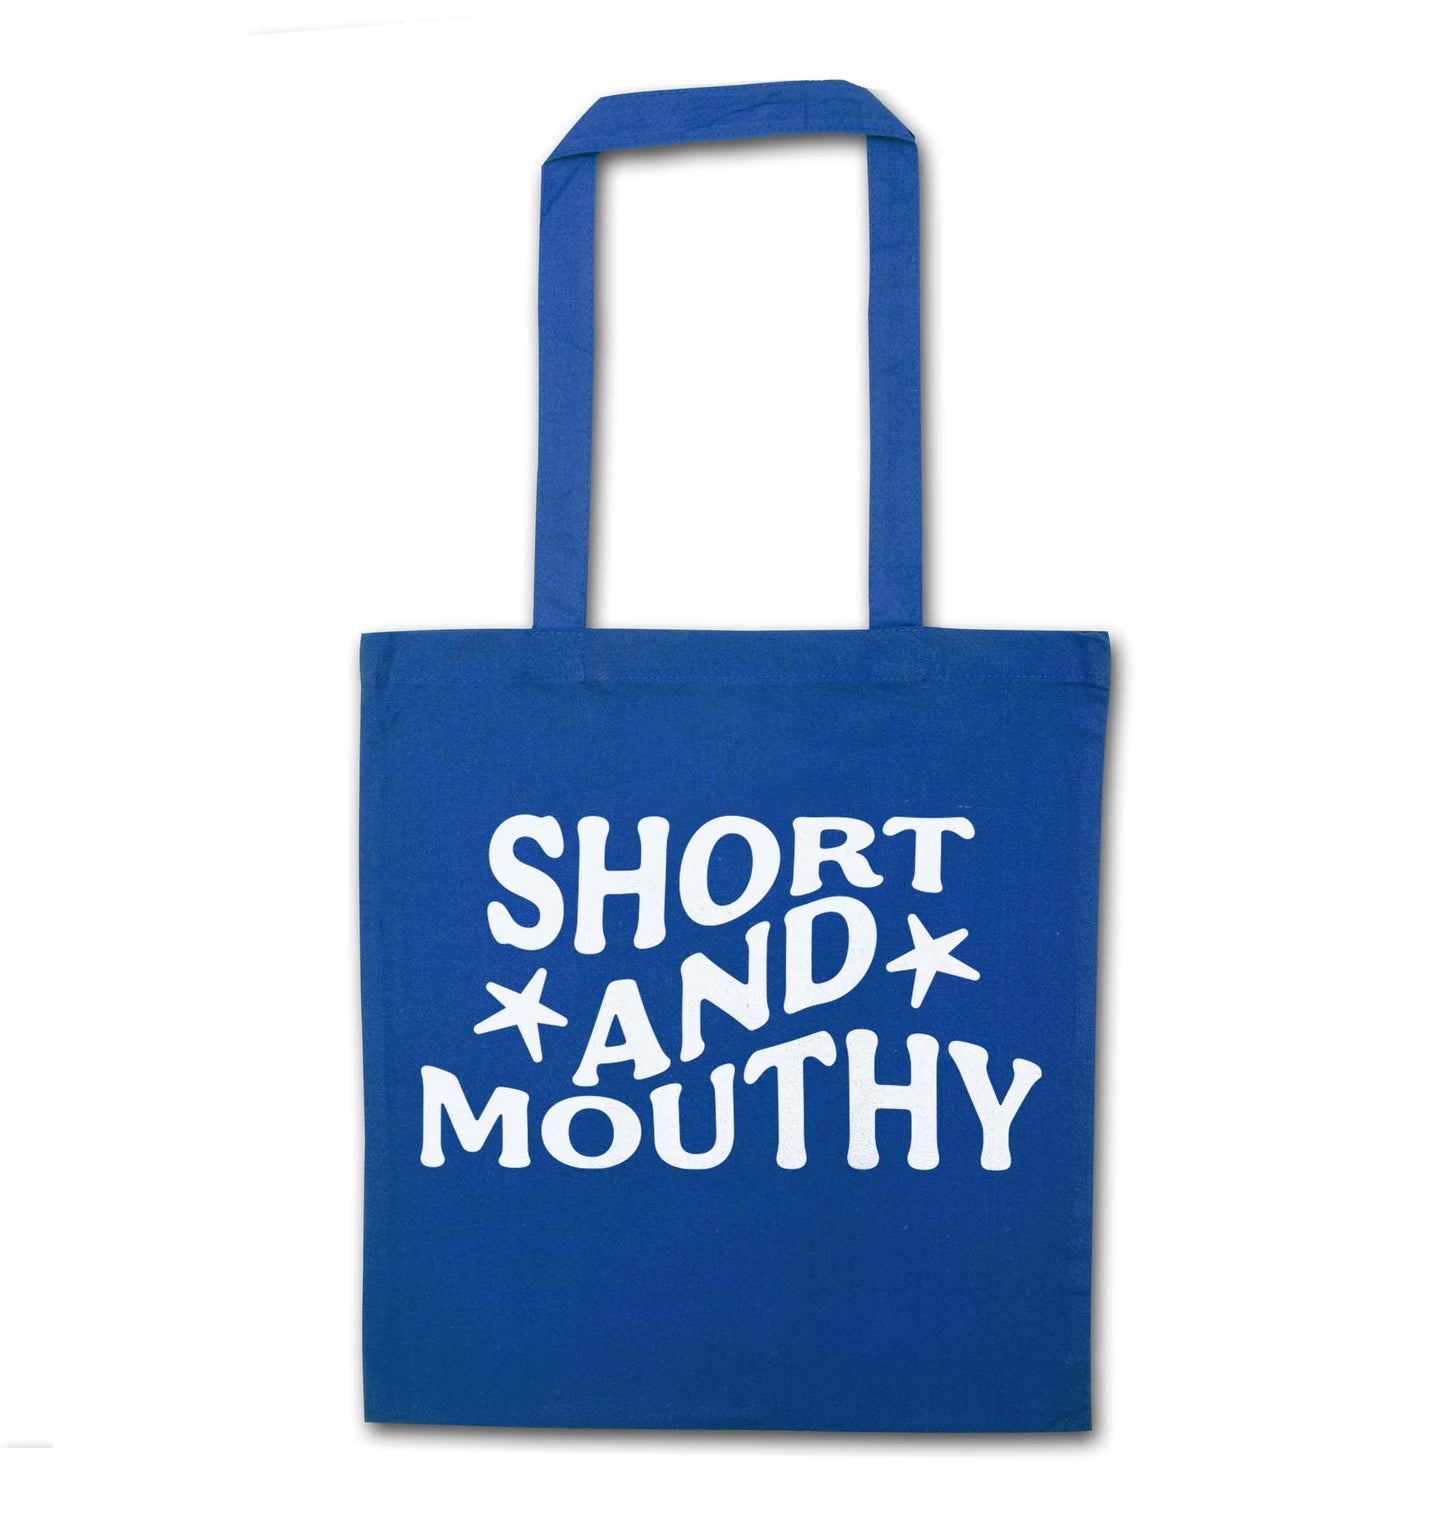 Short and mouthy blue tote bag